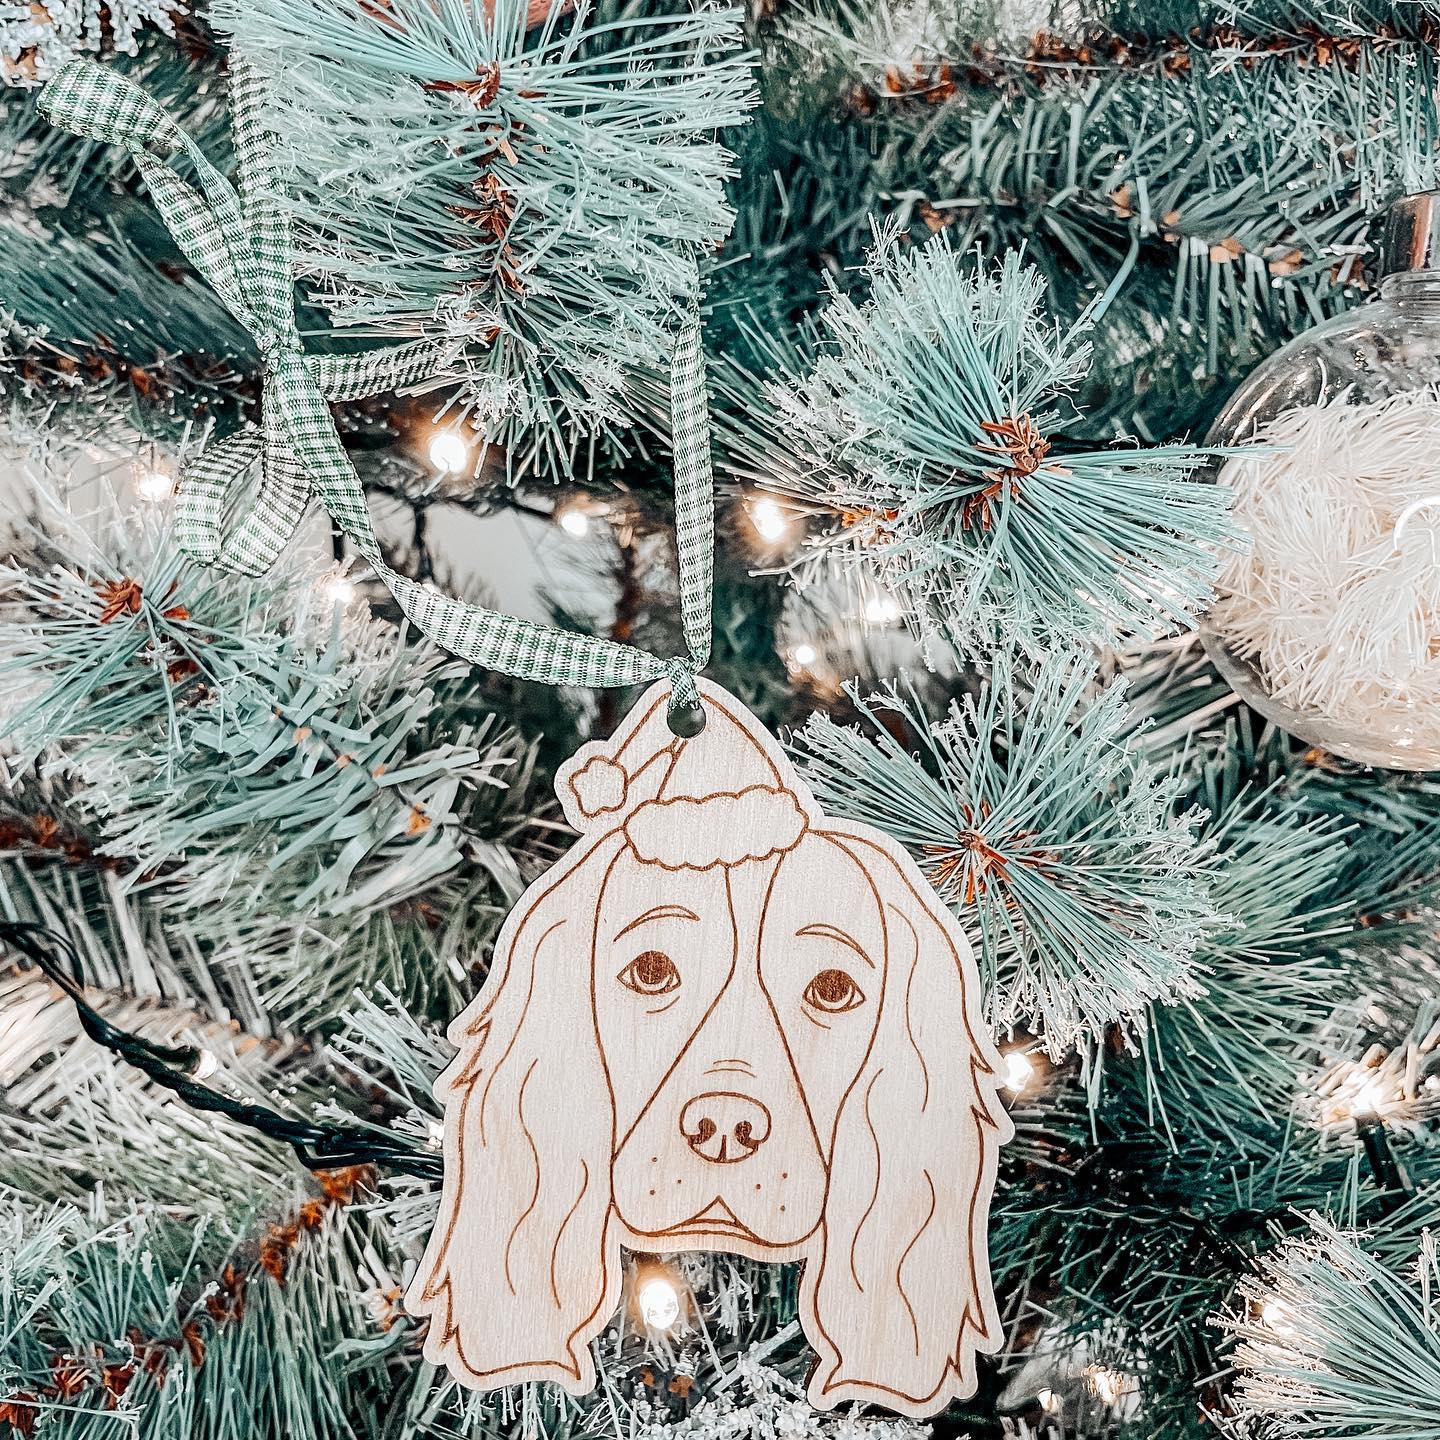 Timber n Tails will be at The Soul Nook Collective Christmas markets with their pup-inspired Christmas ornaments